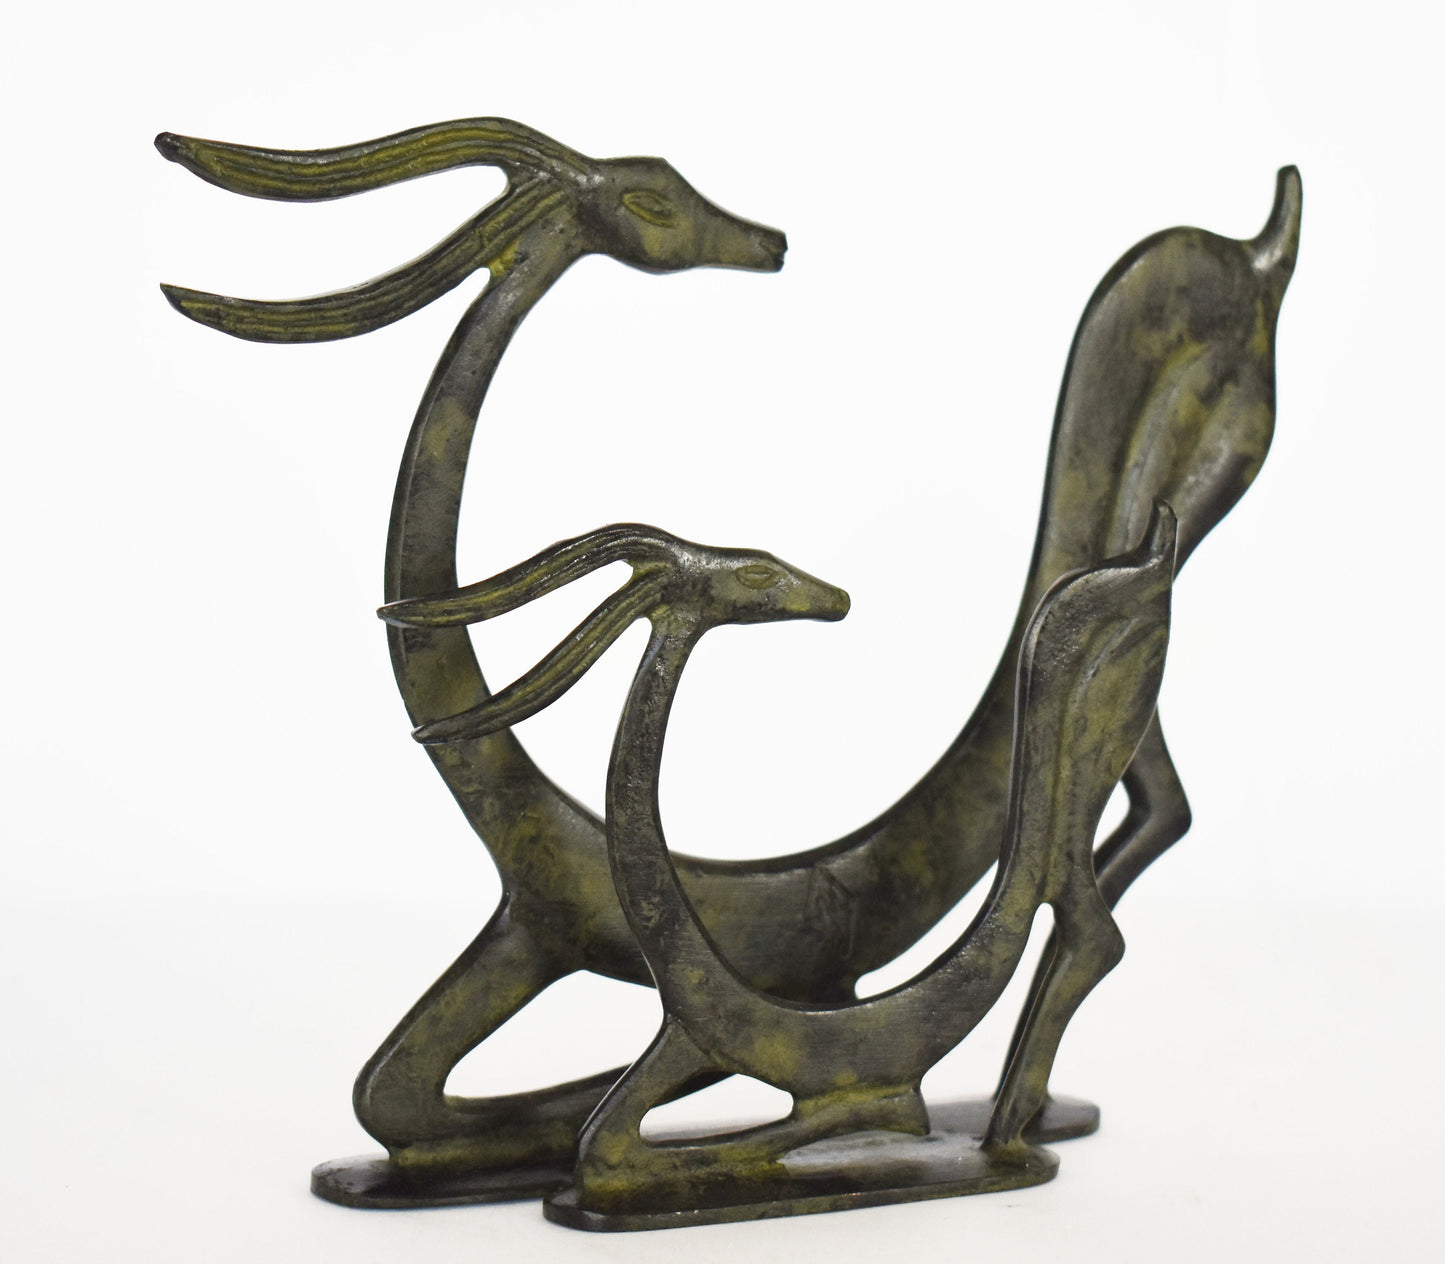 Complex with 2 Graceful Ibex - pure Bronze Sculpture - Symbols of Energy, Long Life, Fertility